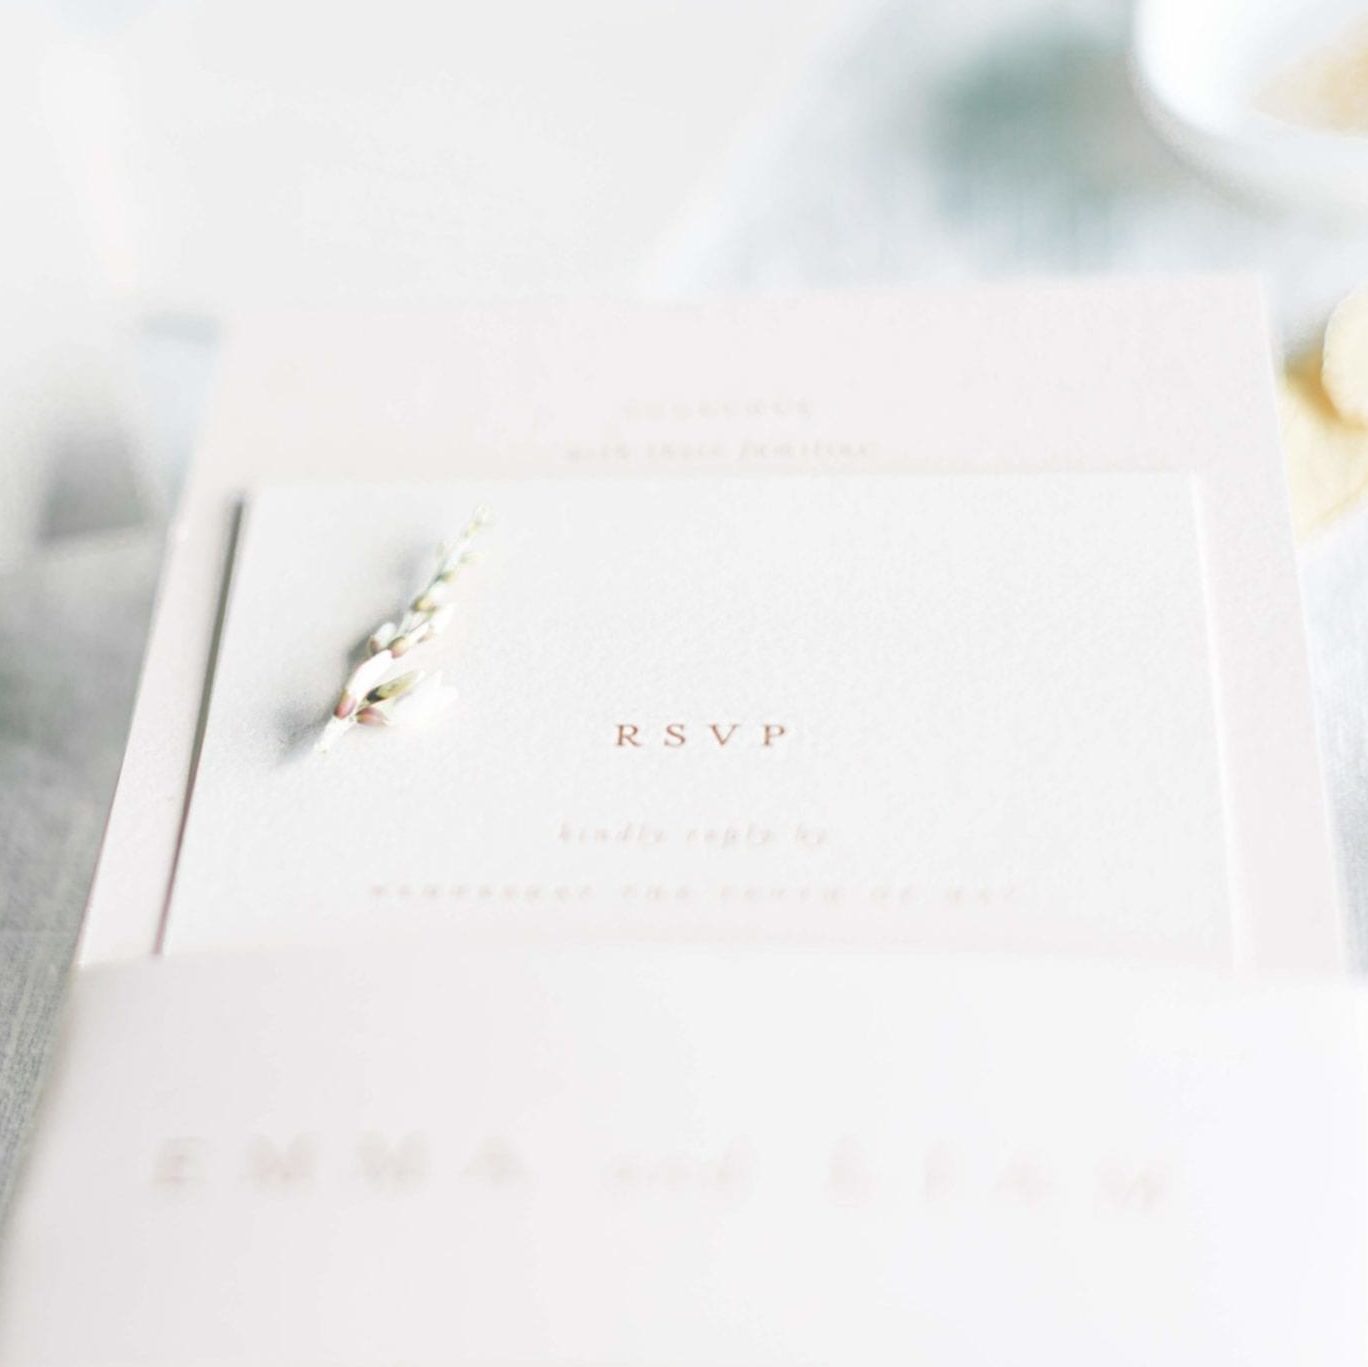 Make sure to include your RSVP card in your photos of wedding invites.